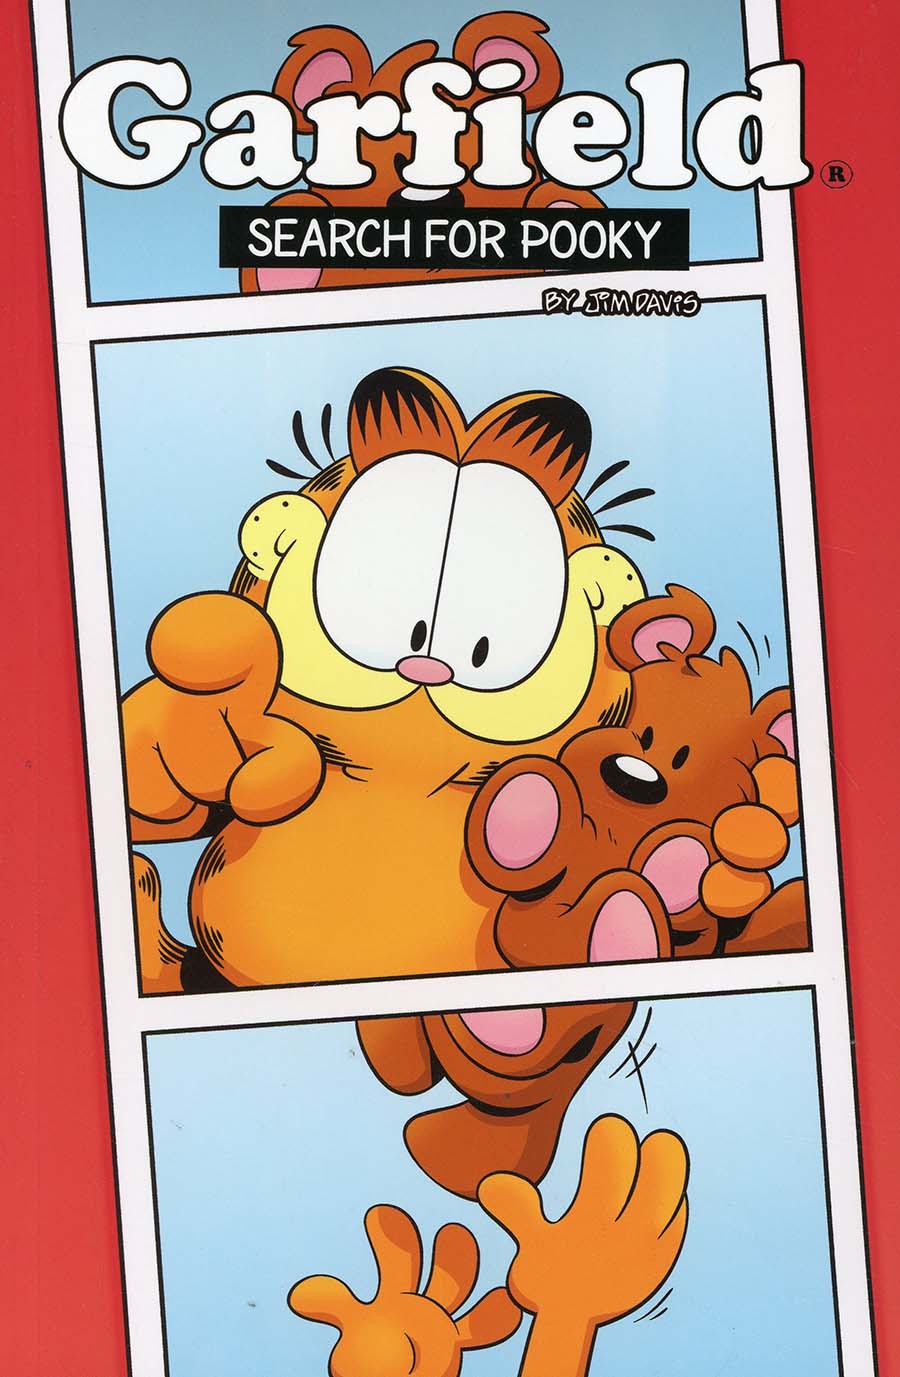 Garfield Original Graphic Novel Vol 4 Search For Pooky TP